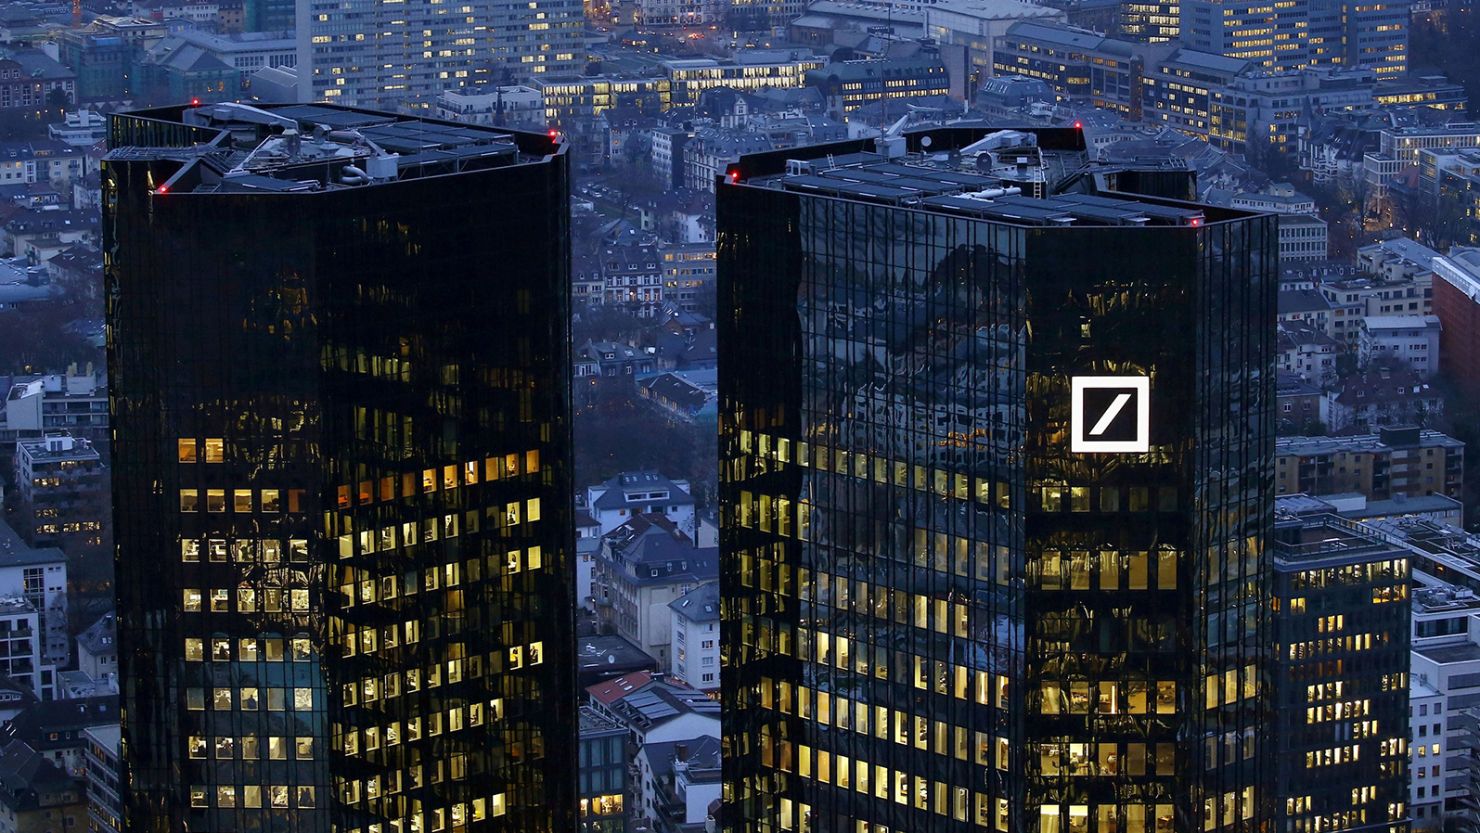 Germany's Deutsche Bank is photographed early evening in Frankfurt, Germany, January 26, 2016.